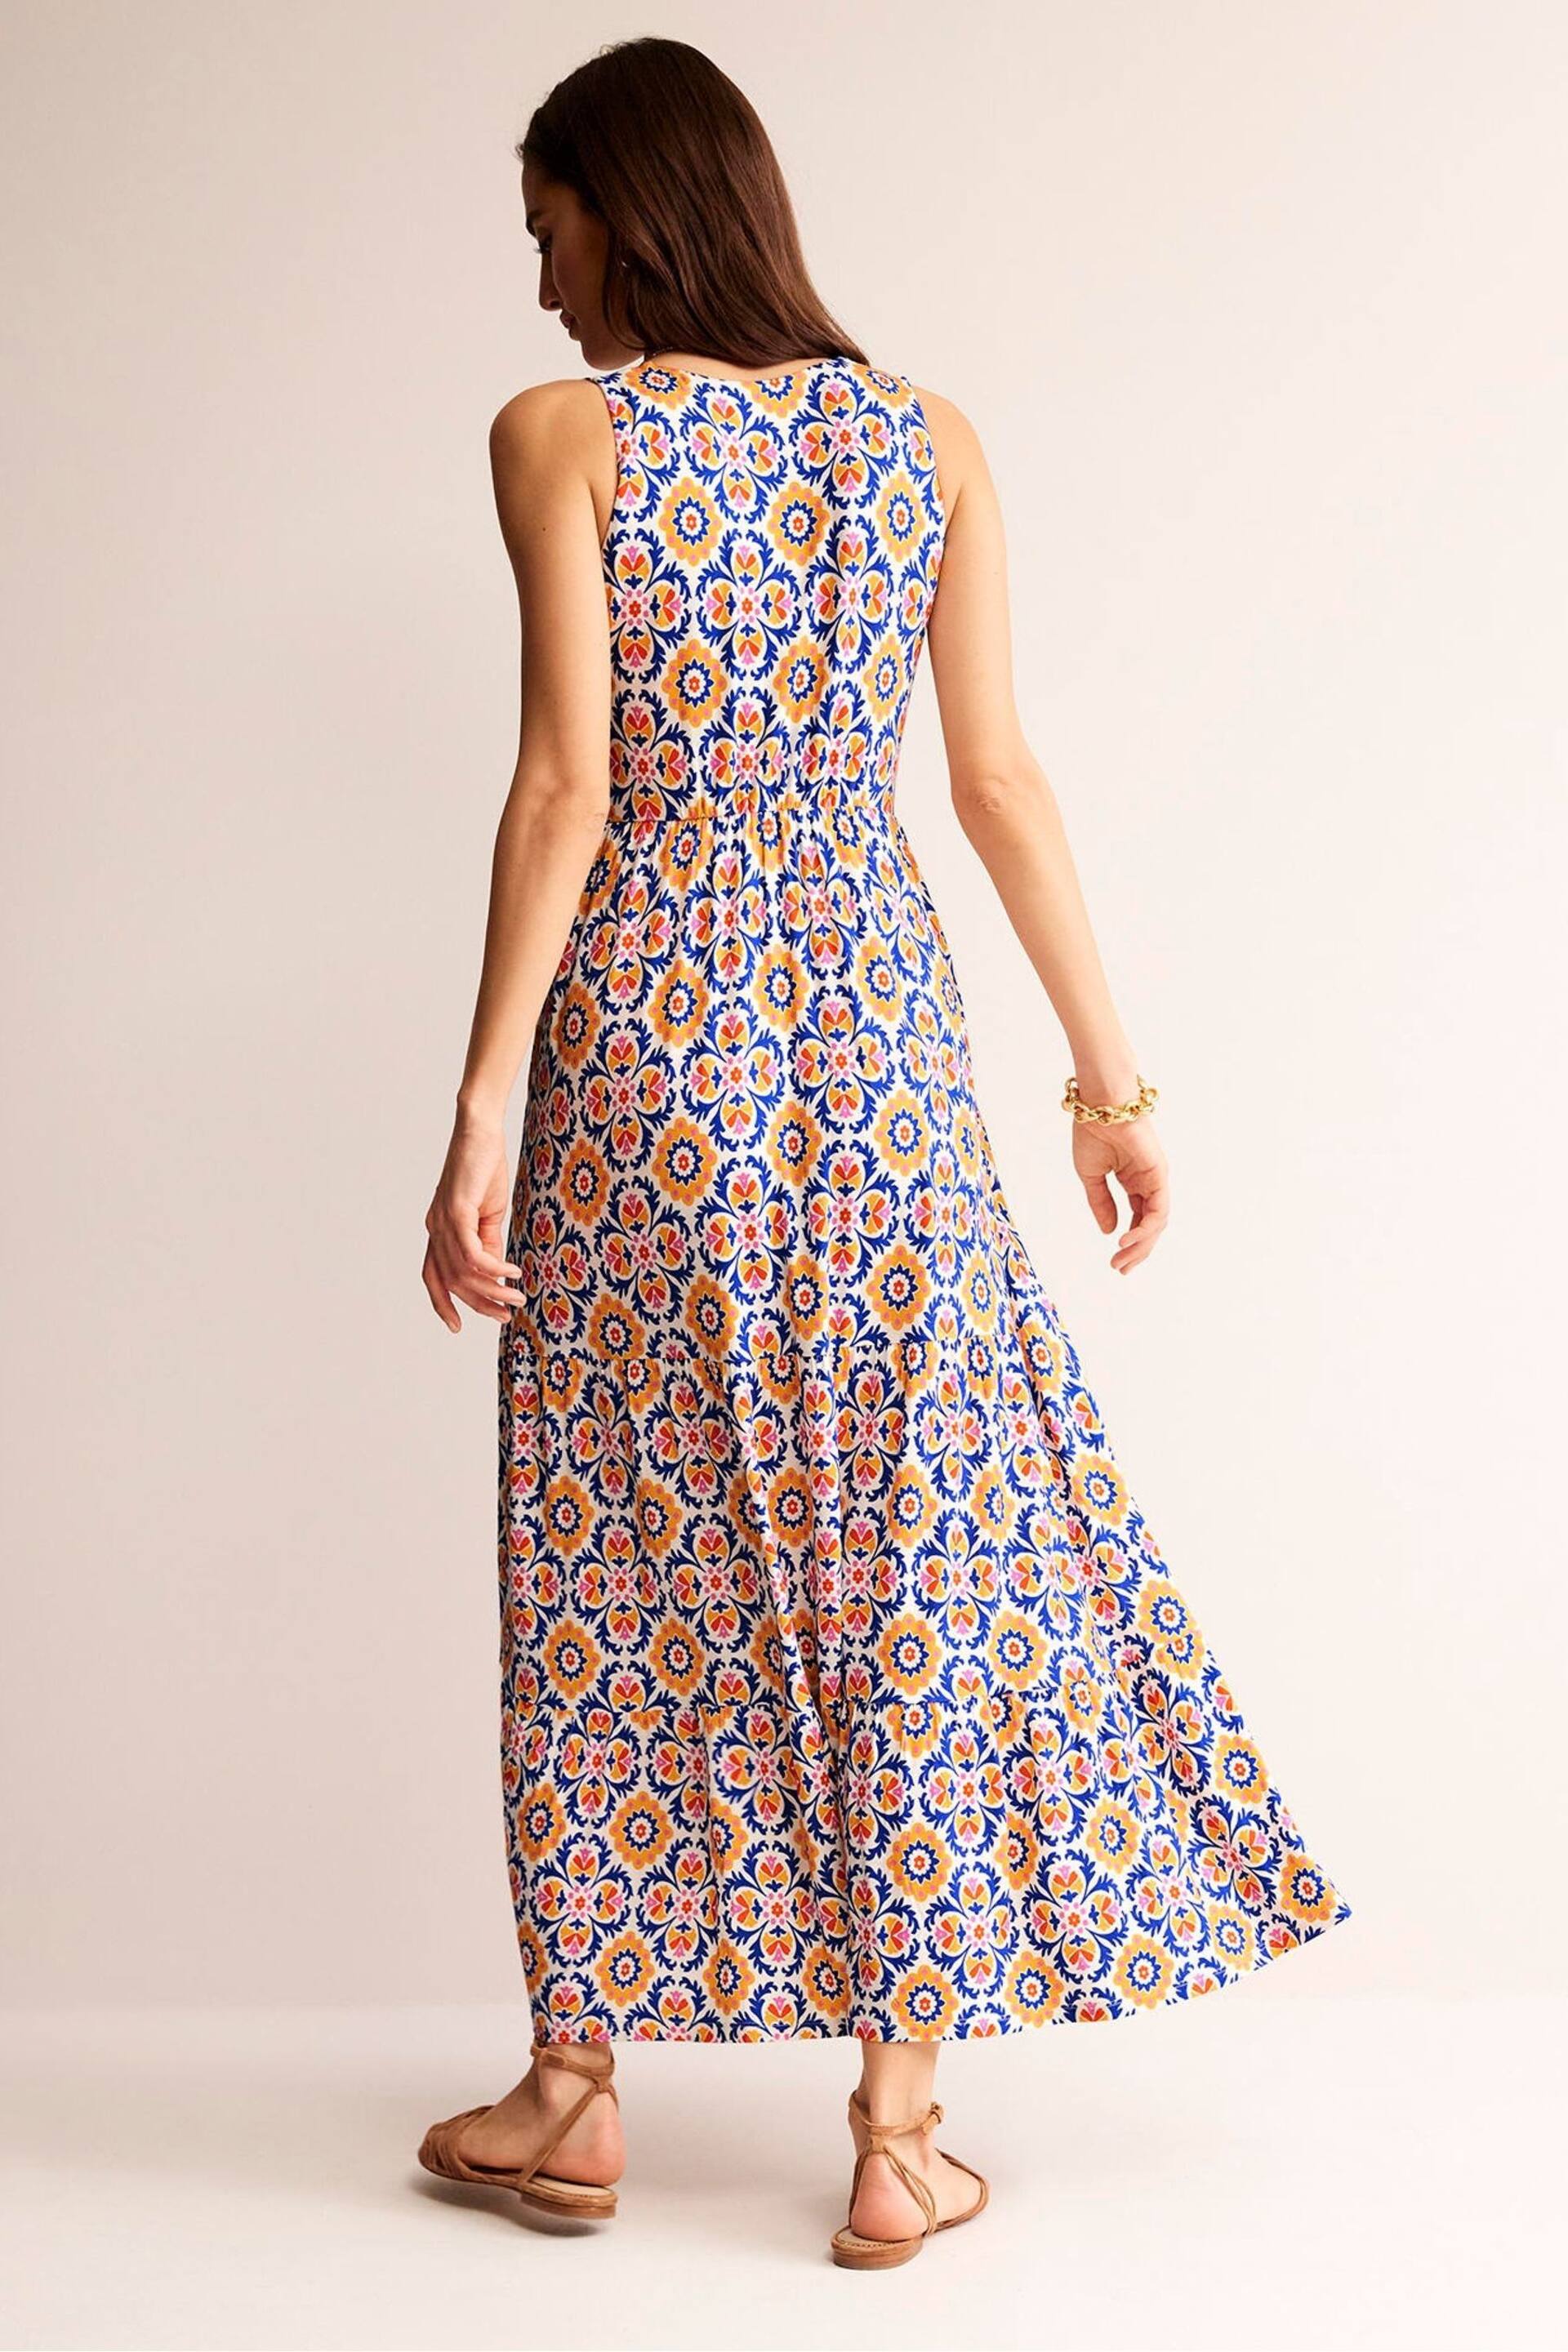 Boden Yellow Sylvia Jersey Maxi Tier Dress - Image 3 of 5